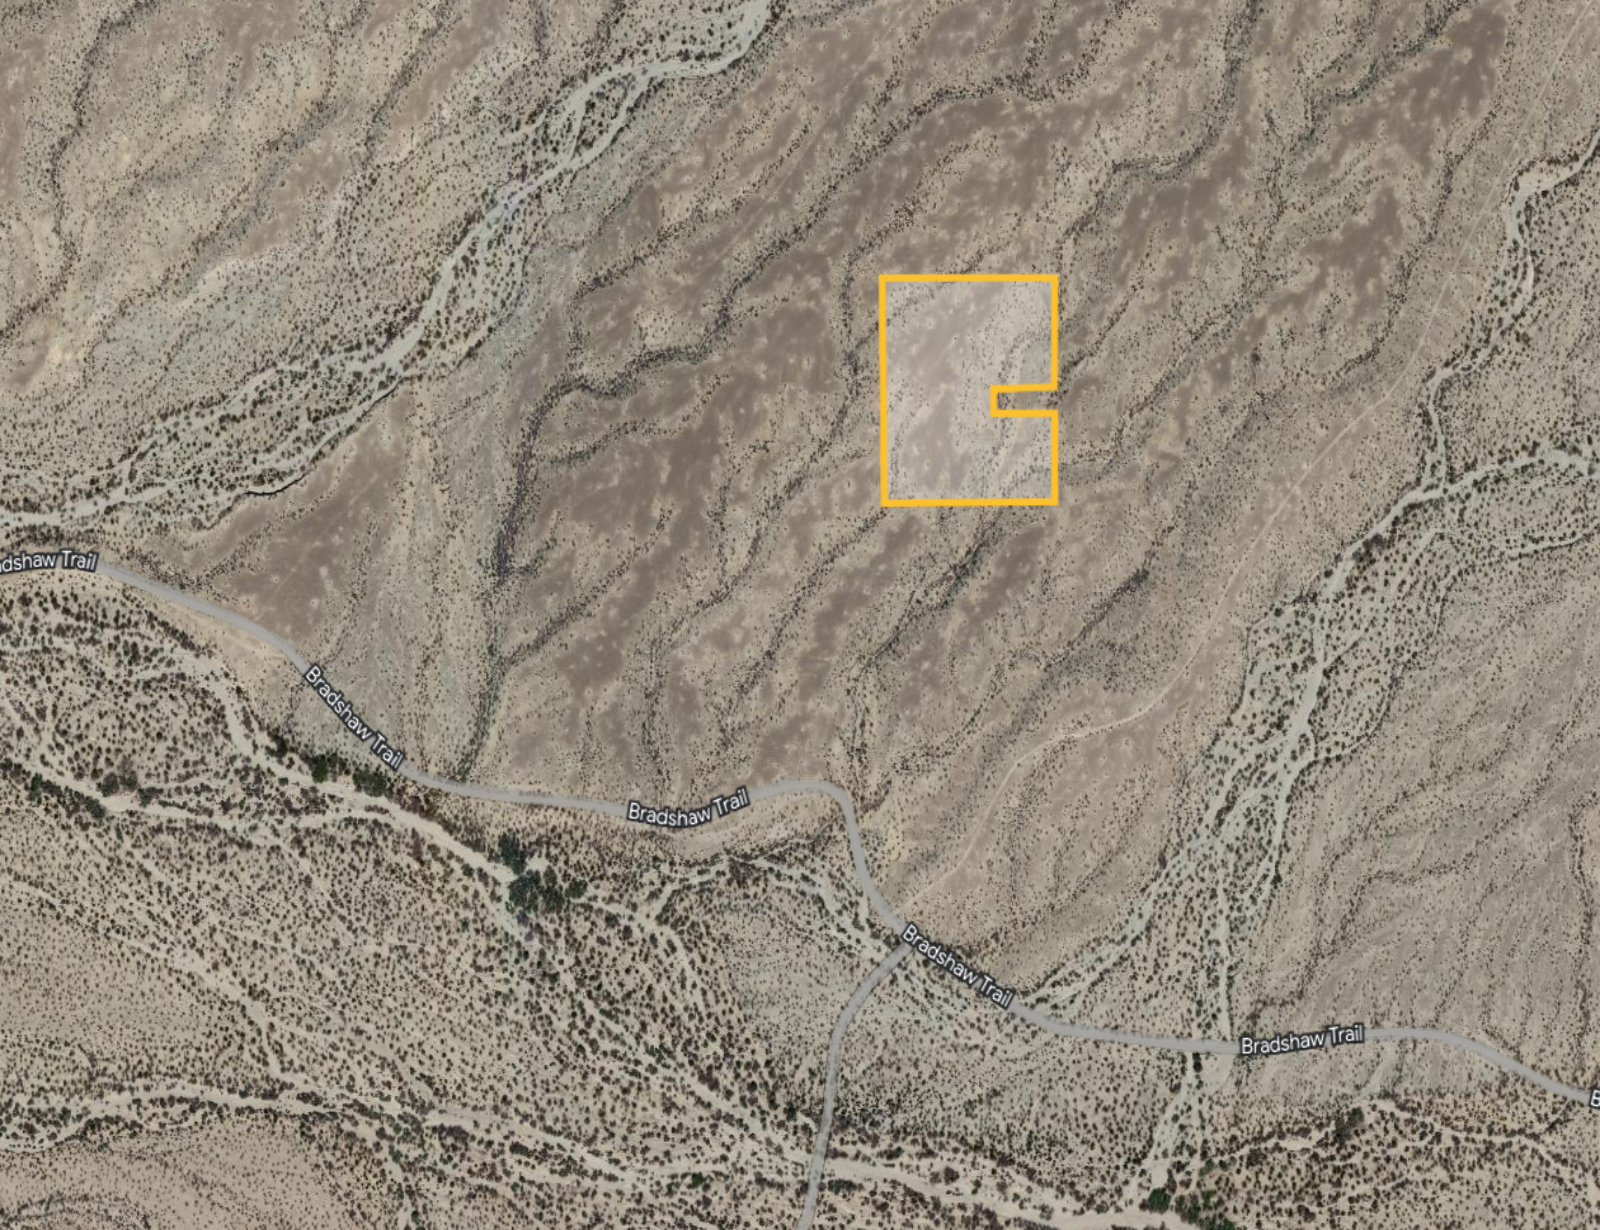 *NEW* RECREATIONAL 10 ACRES NEAR CHUCKWALLA MOUNTAINS!! LOW MONTHLY PAYMENTS OF $175.00 APN: 859-330-048 - Get Land Today